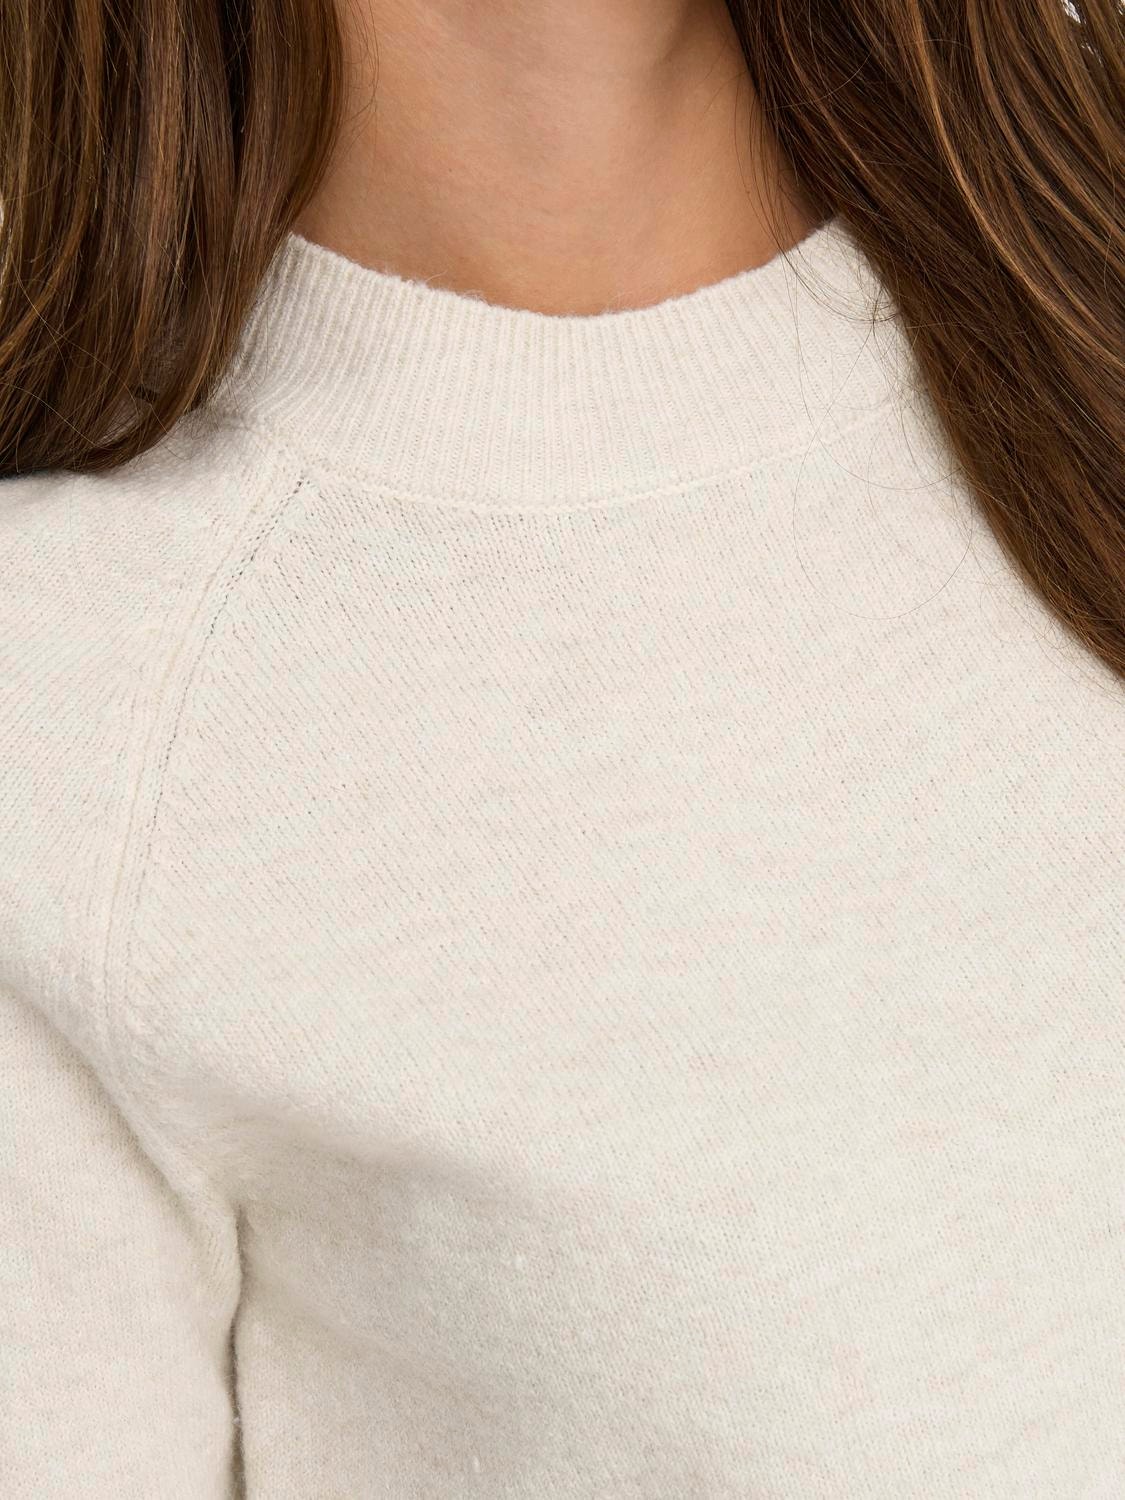 ONLY Round Neck Ribbed cuffs Pullover -Birch - 15204279